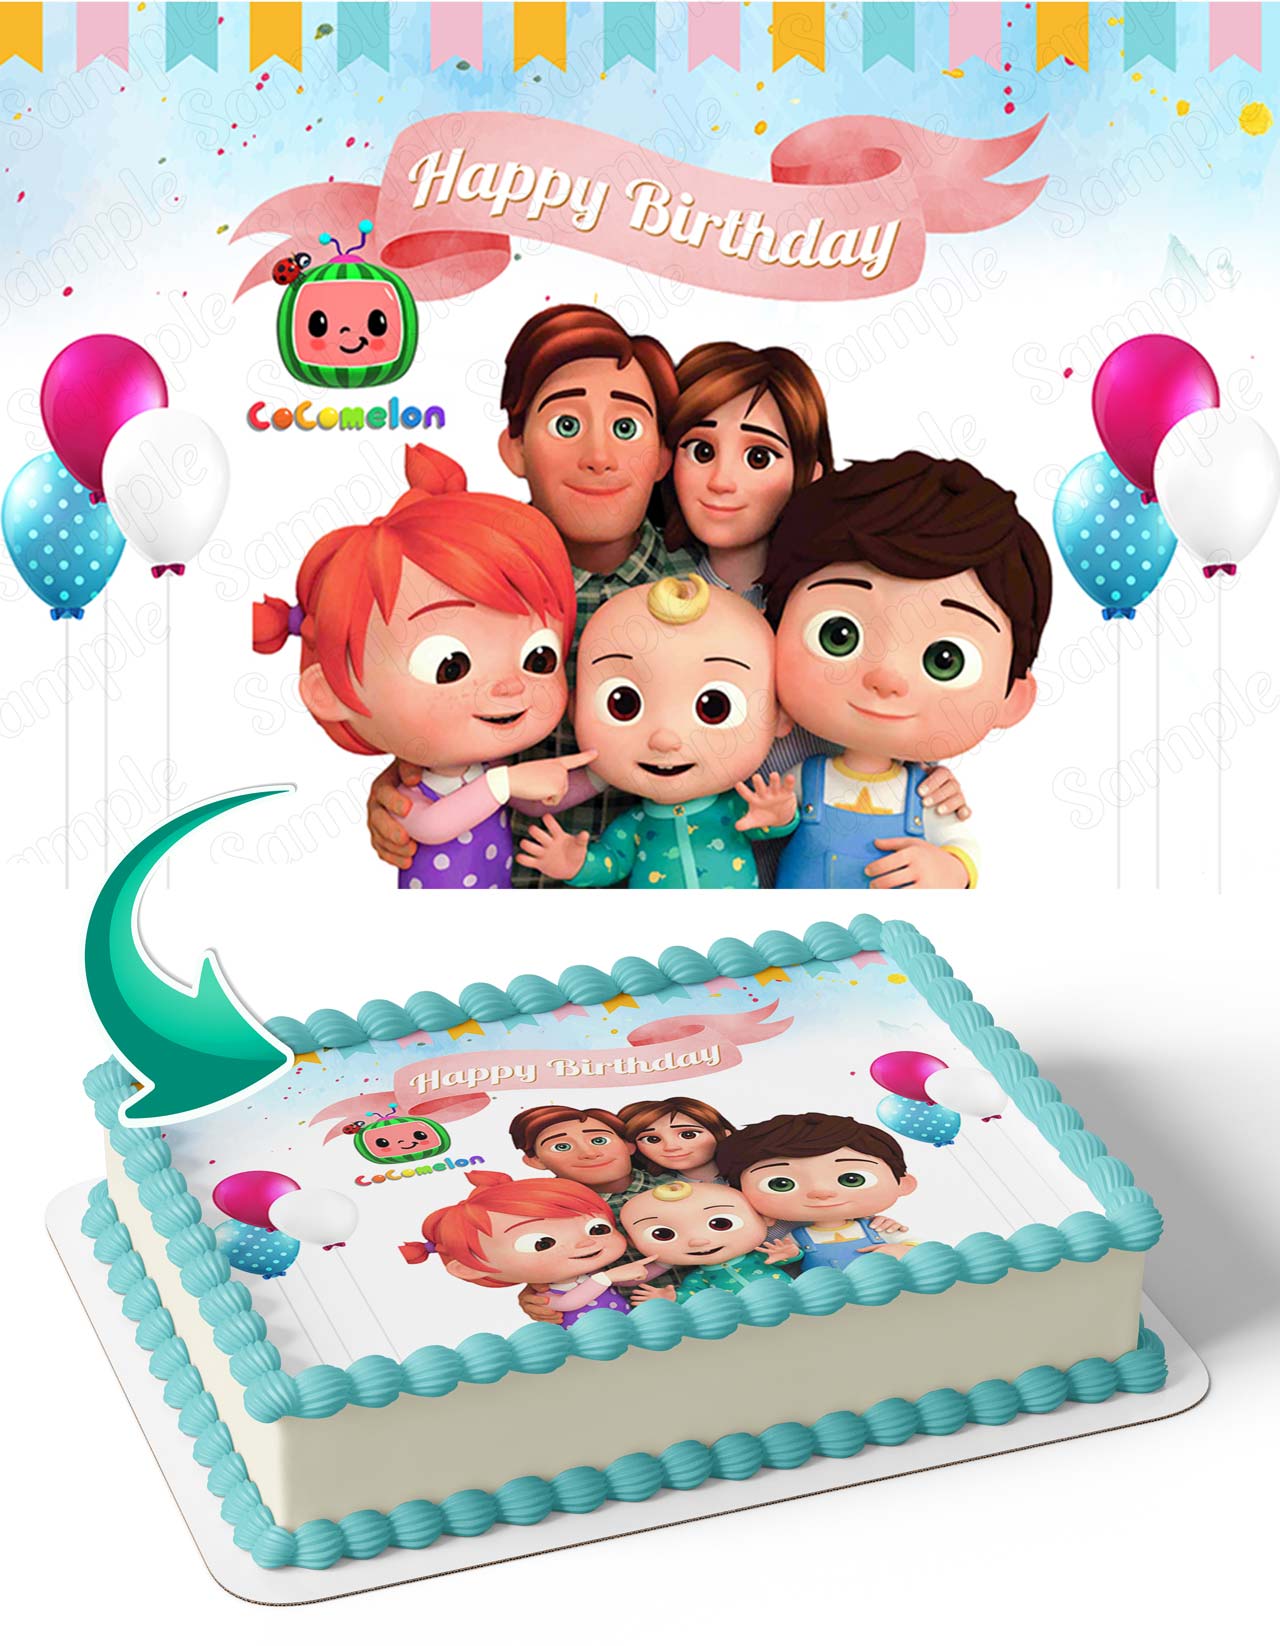 7 PC Chota Bheem Cartoon Theme Birthday Cake Topper Insert, Cake Topper, Cupcake  Toppers for Boy's, Friends, Brother, Wife, Bday Decorations Items/Cake  Accessories, Tags, Cards, Cake Toothpick Topper